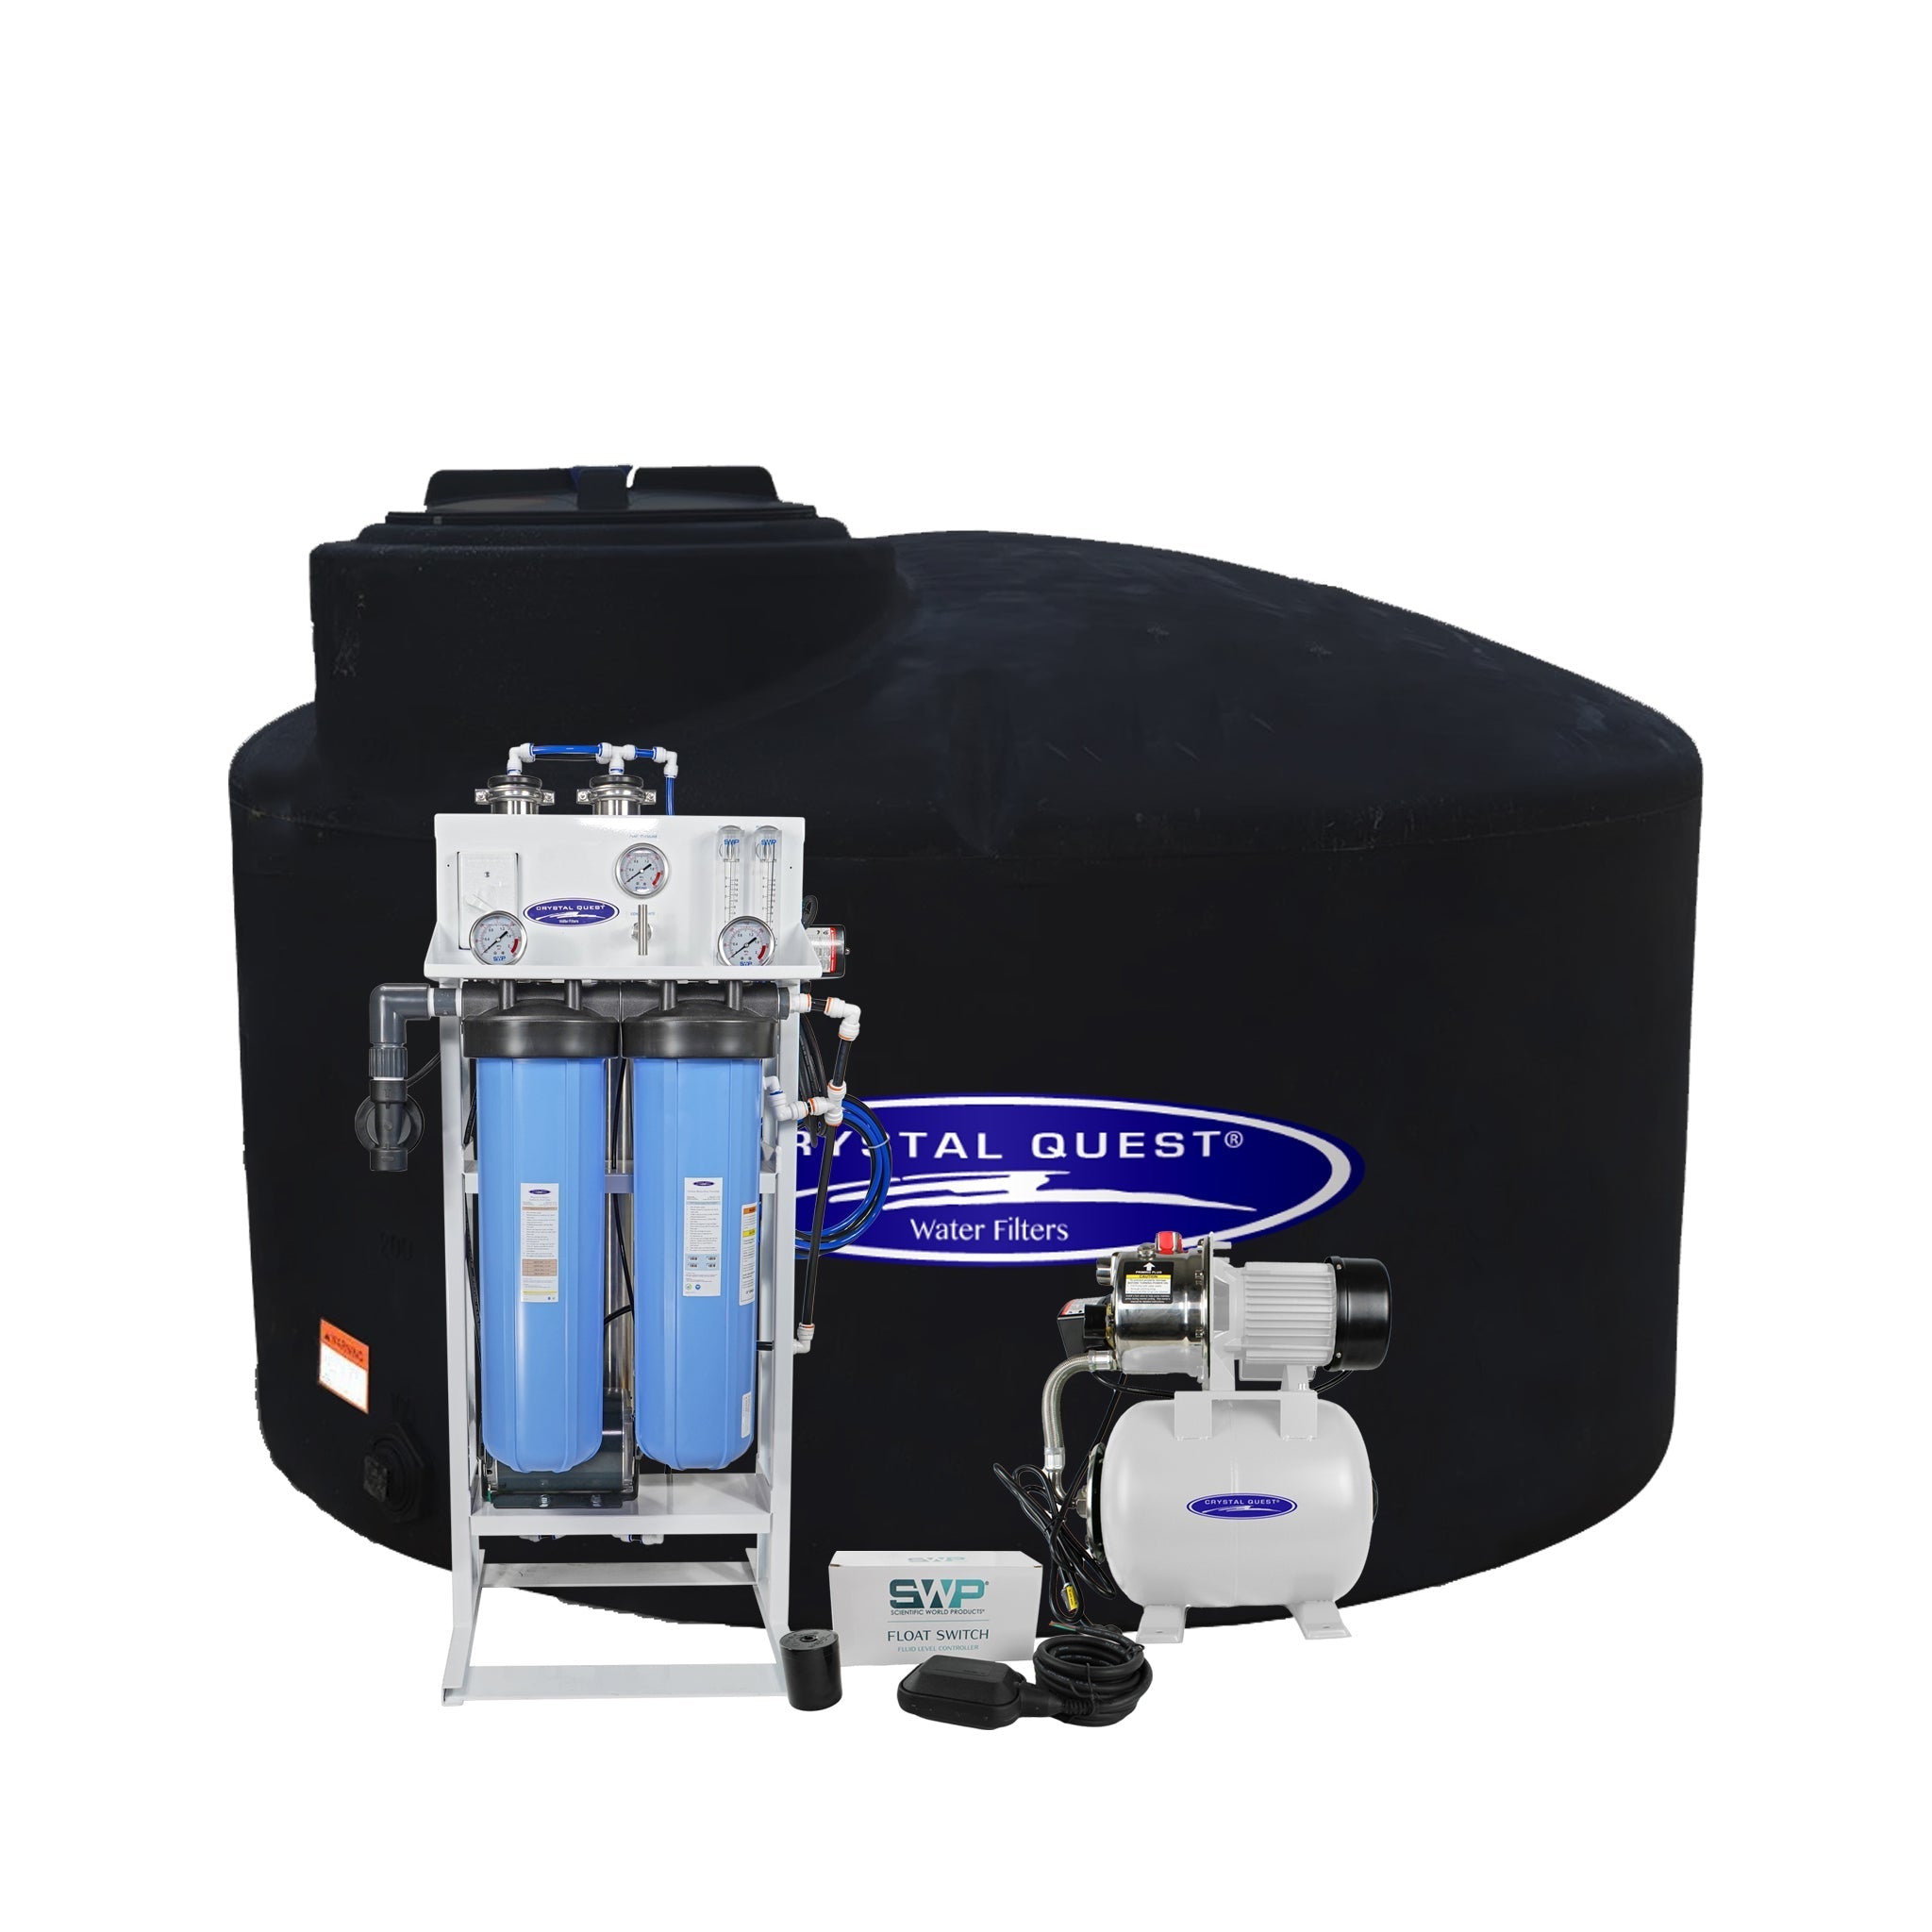 Crystal Quest Whole House Reverse Osmosis System 1500 GPD RO Pump and 550 Gallon Storage Tank